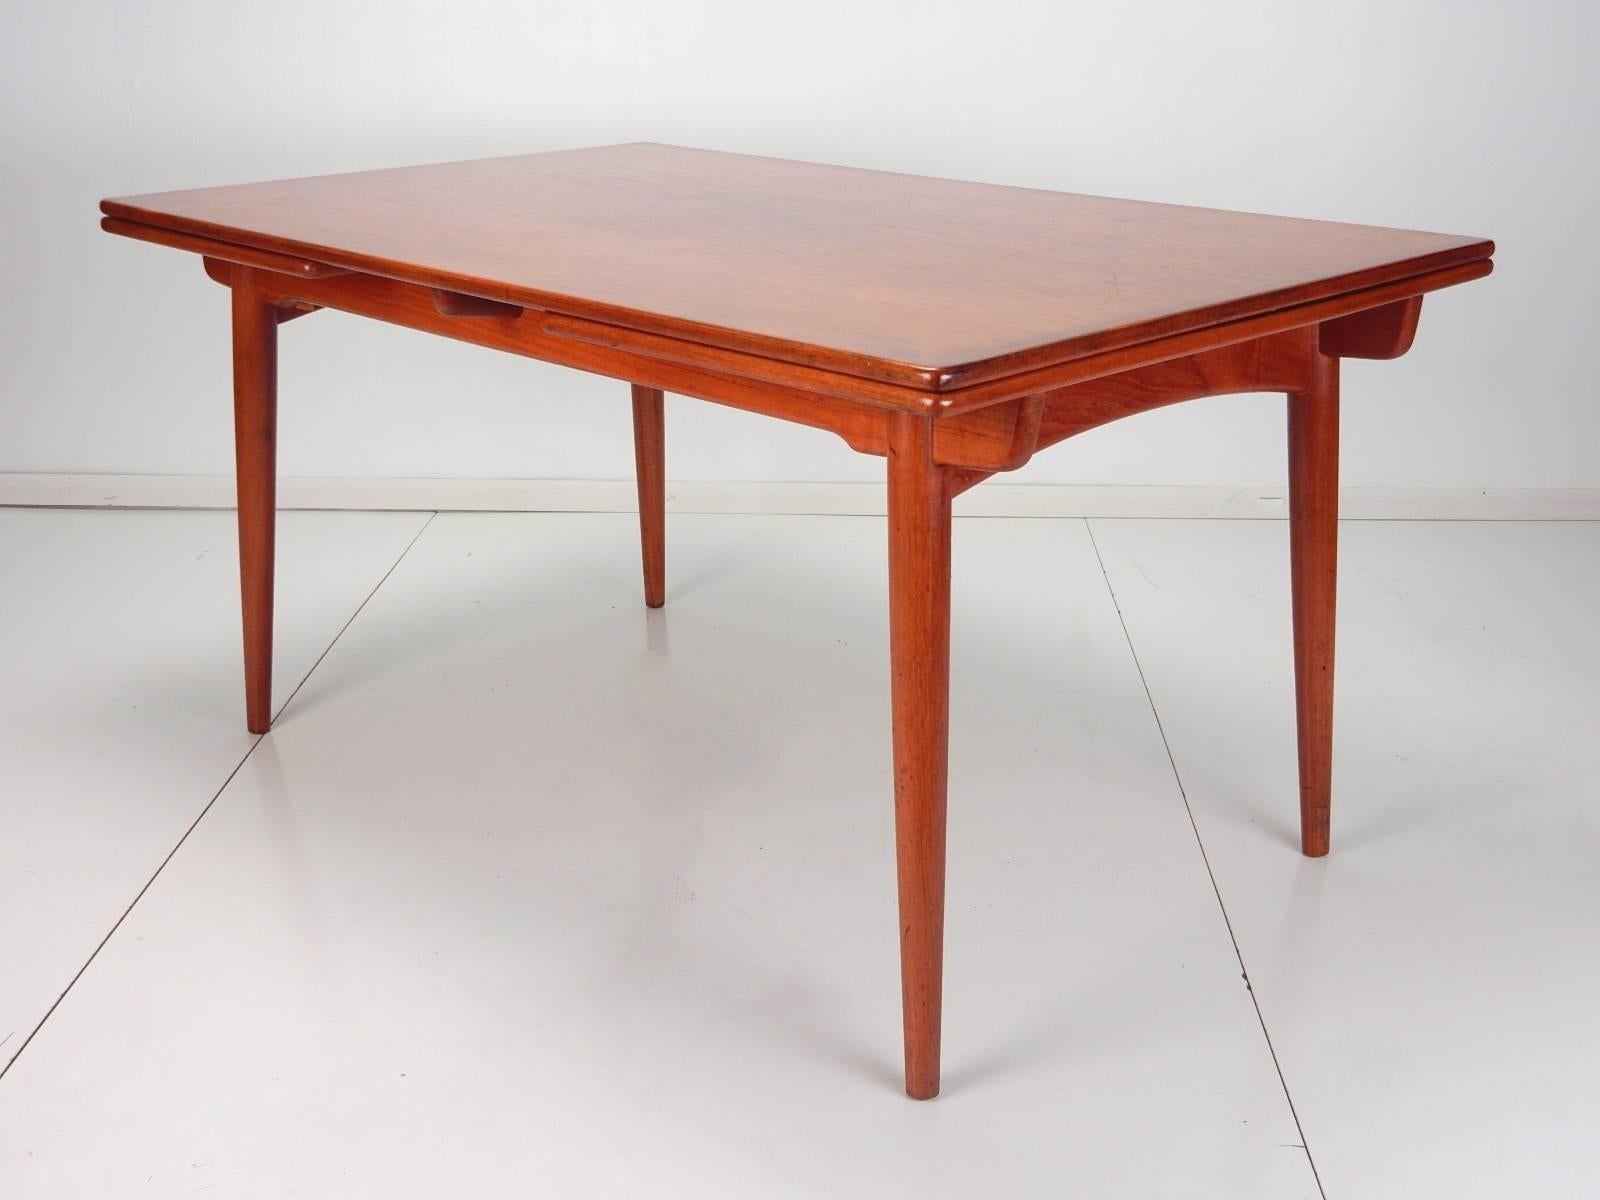 Hans Wegner design mod. AT-312 drop-leaf dining table for Andreas Tuck.
Made in Denmark. Seats eight comfortably.
Gorgeous teak wood with amazing grain. Signed on underside as pictured.
Excellent original condition (not refinished) with no damage